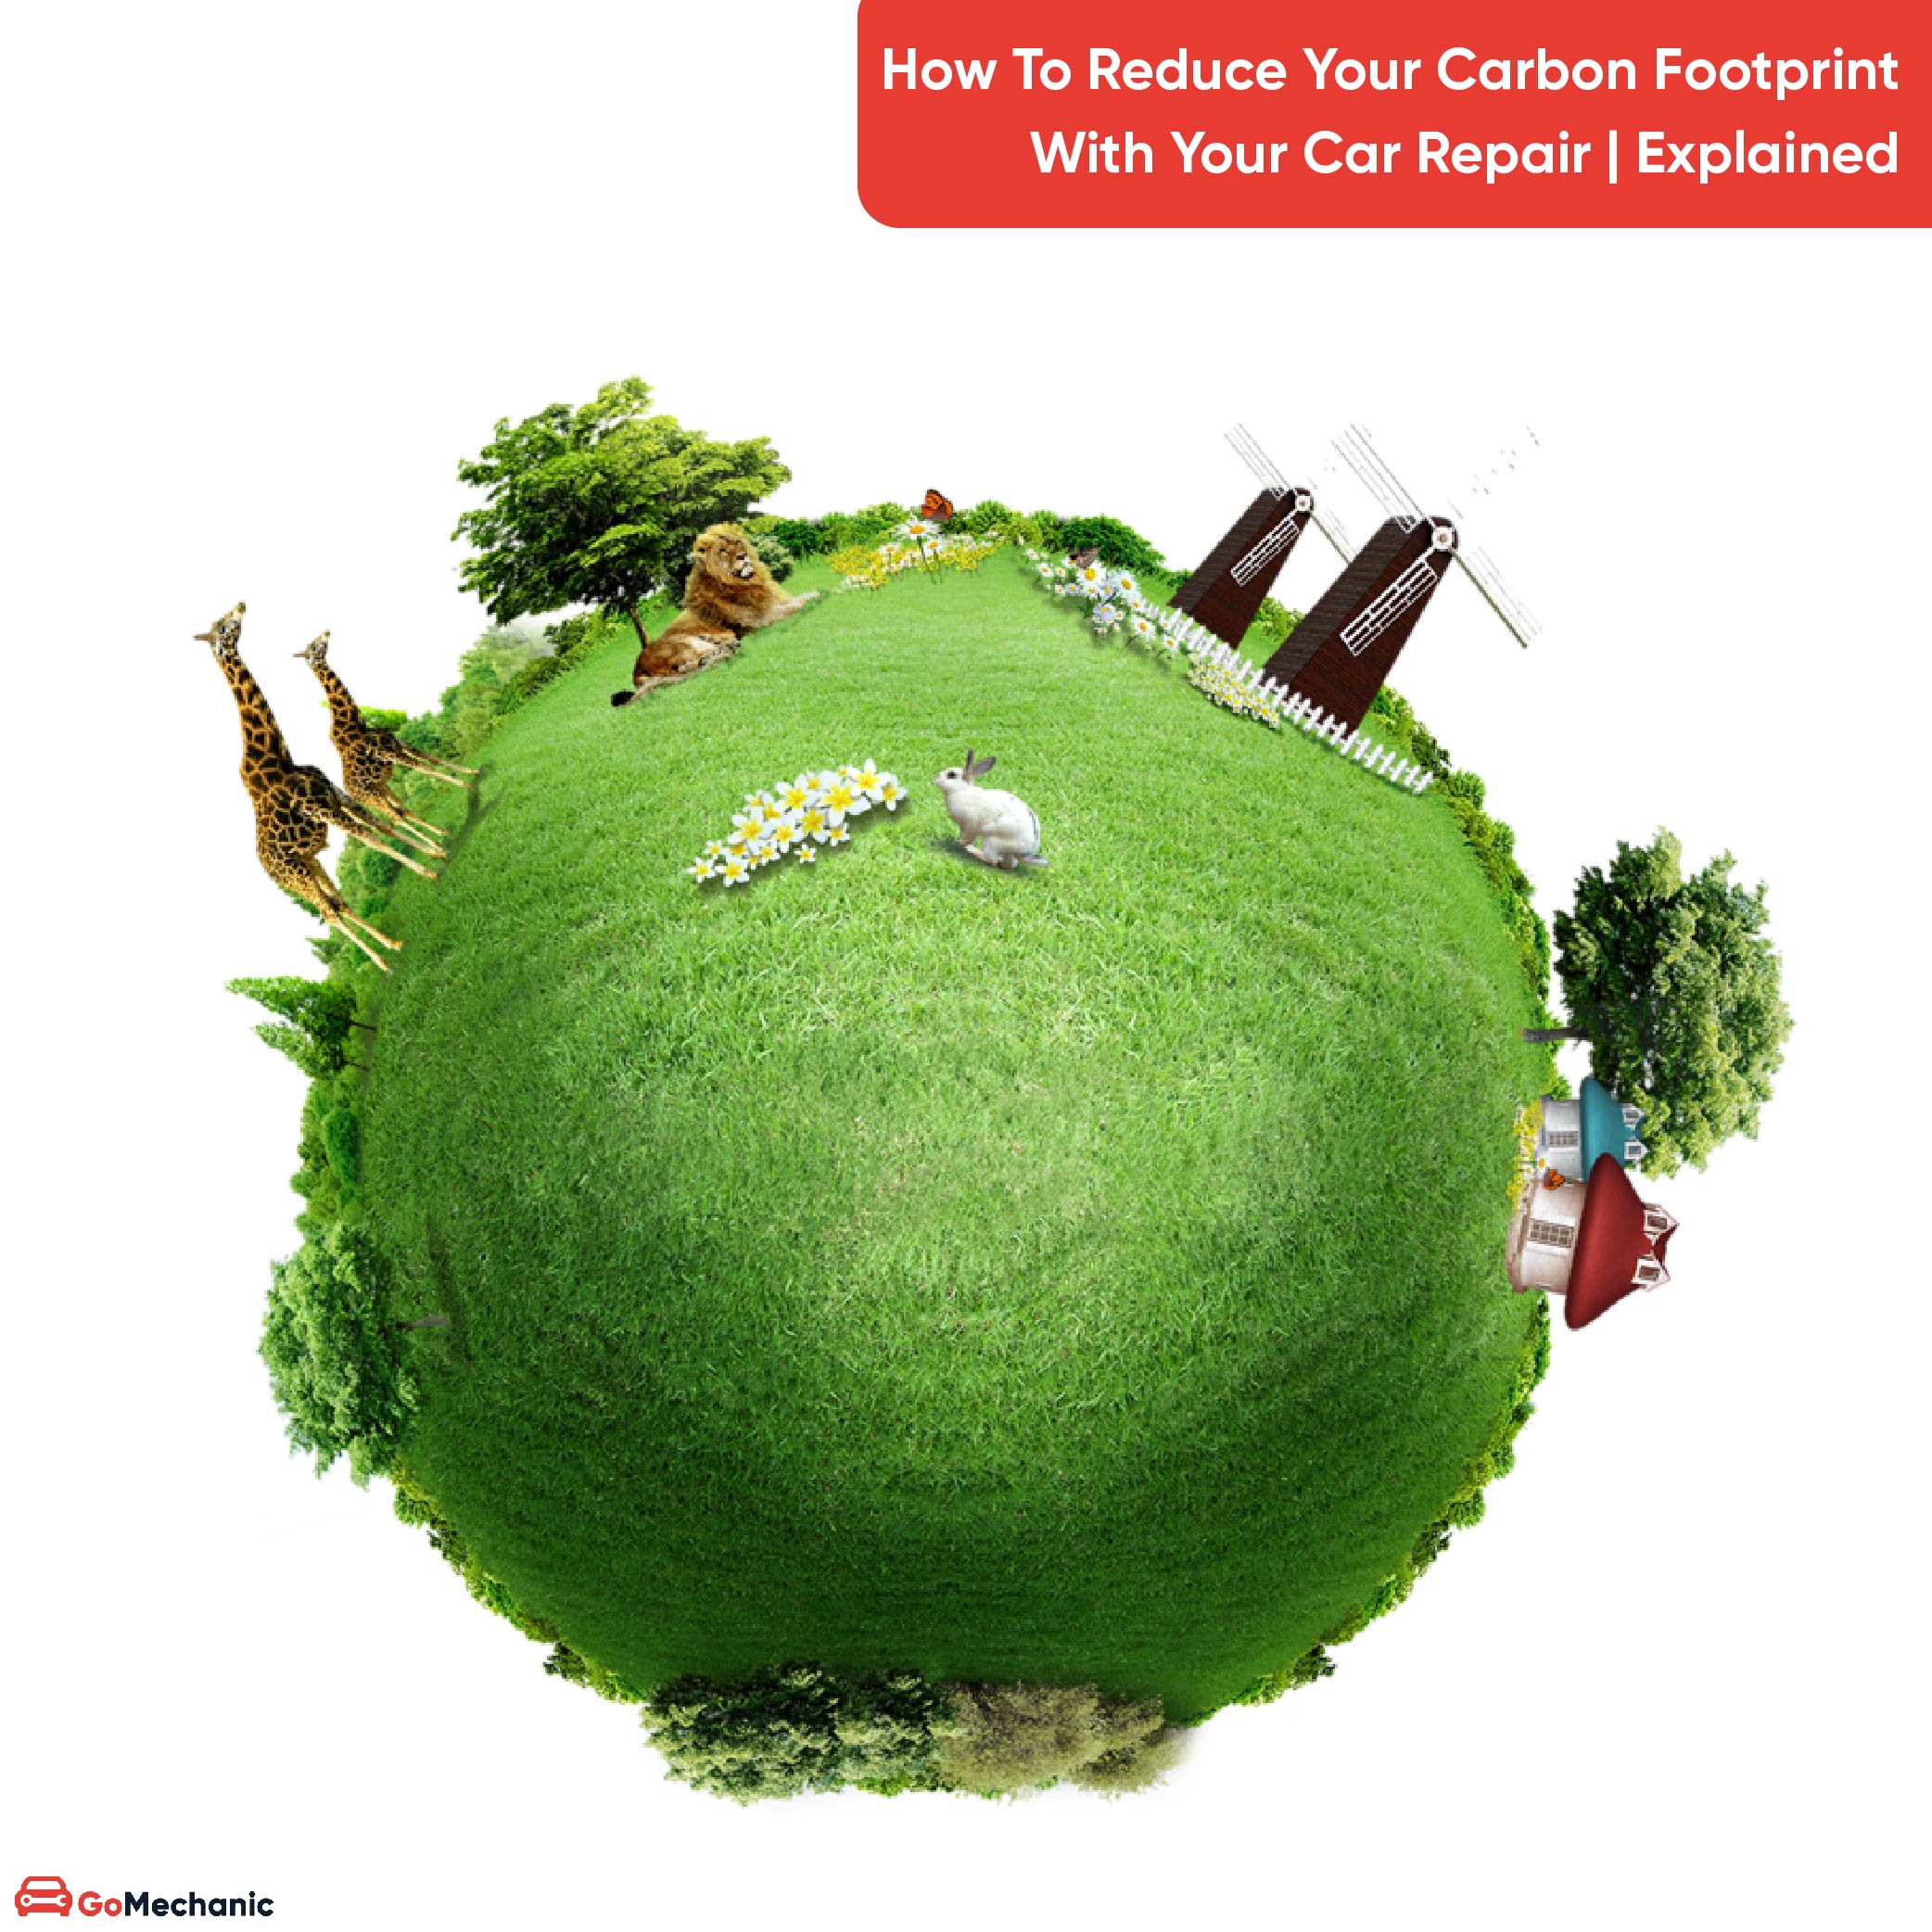 How to reduce your carbon footprint with your car repair